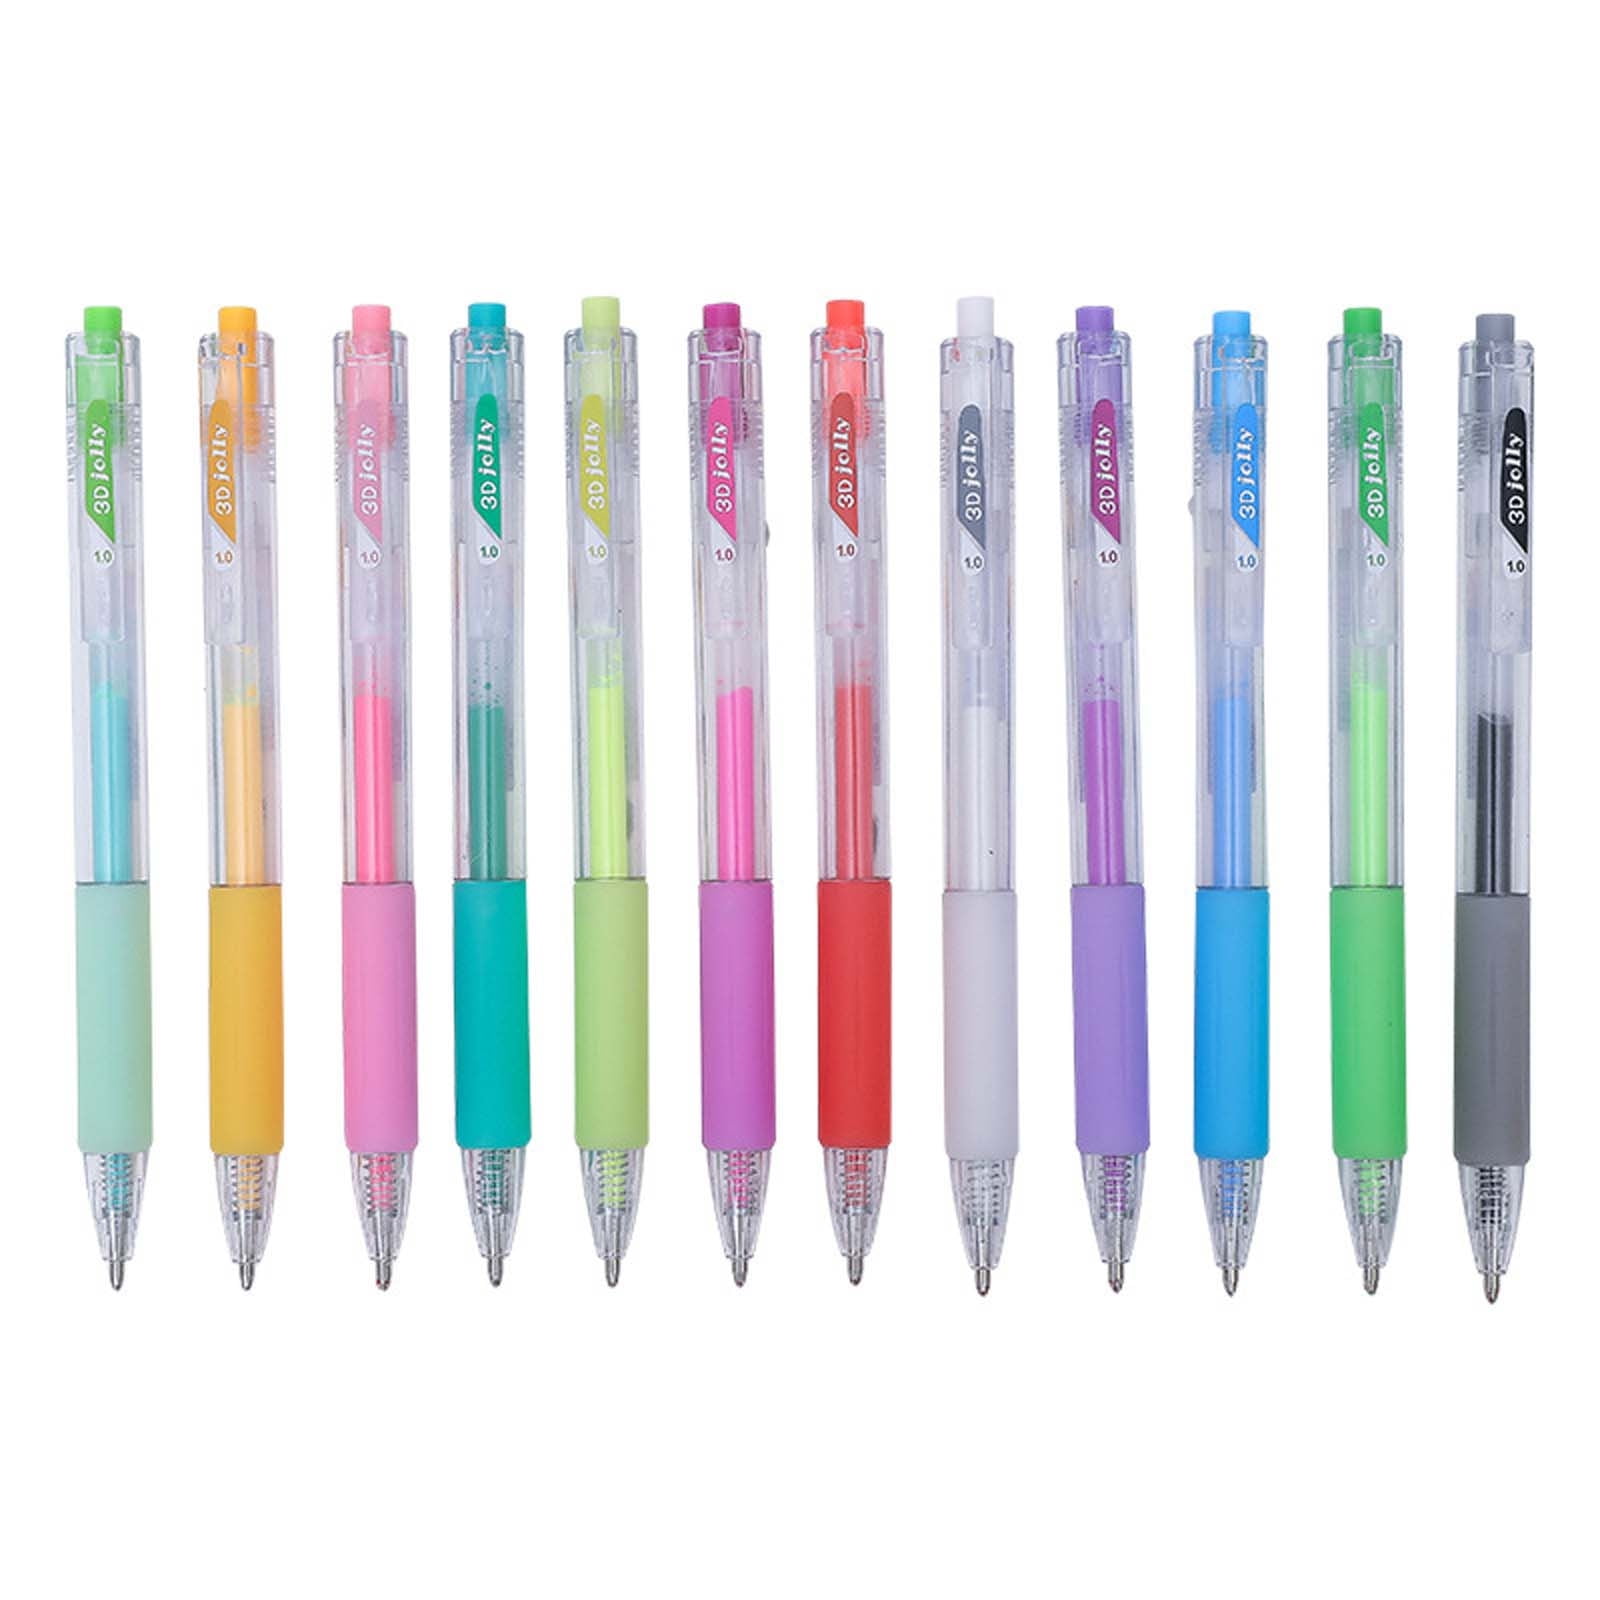 SCRIB3D P1 3D Printing Pen with Display - Includes 3D Pen, 3 Starter Colors  of PLA Filament, Stencil Book + Project Guide, and Charger 